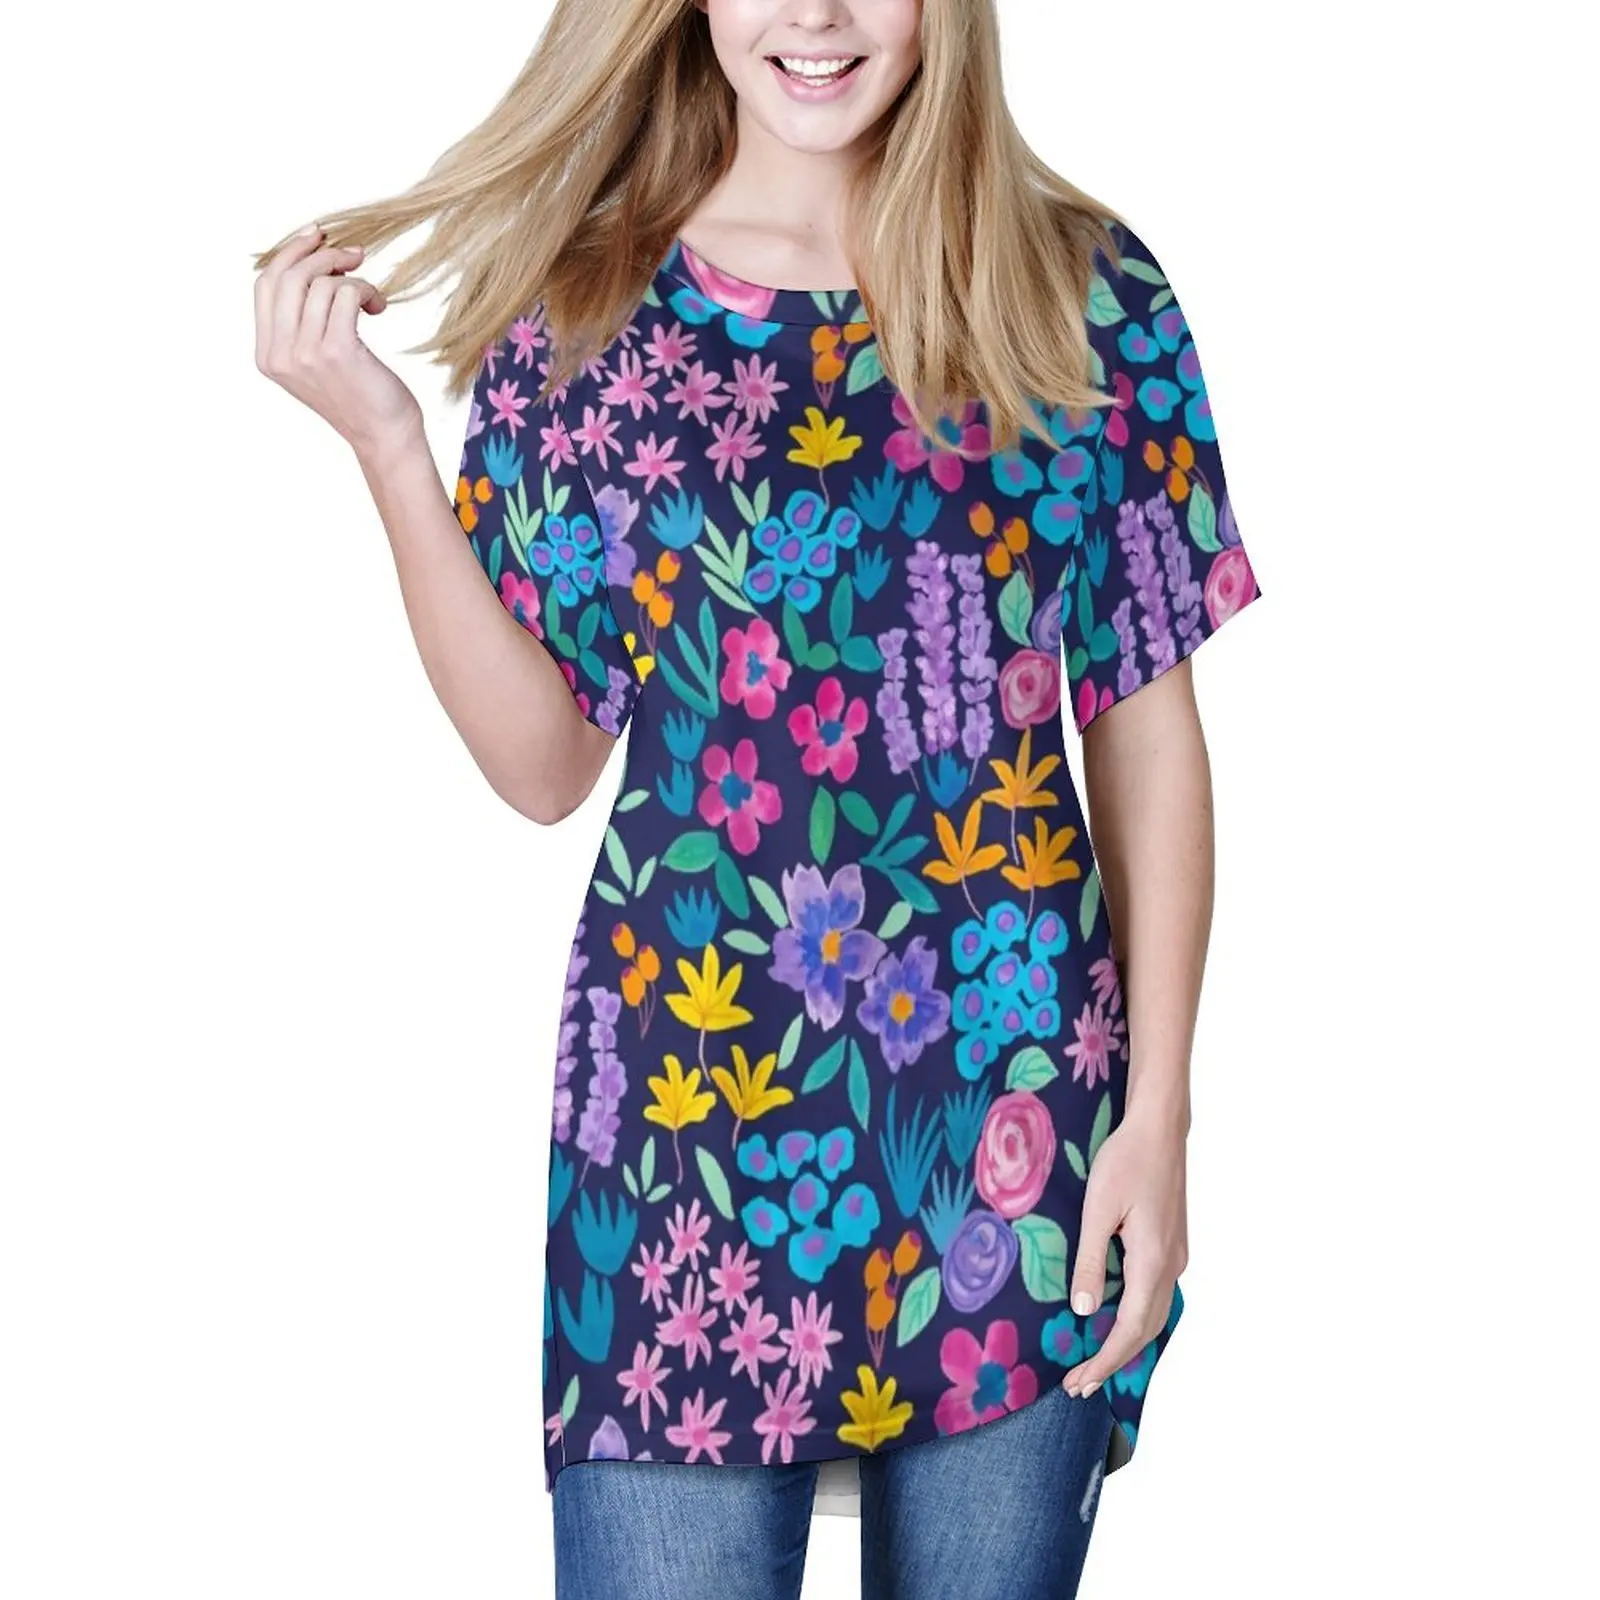 

Bright Flowers T-Shirt Vibrant Floral Pirnt Trendy T Shirts Short-Sleeve Casual Long Tshirt Summer Printed Tees Large Size